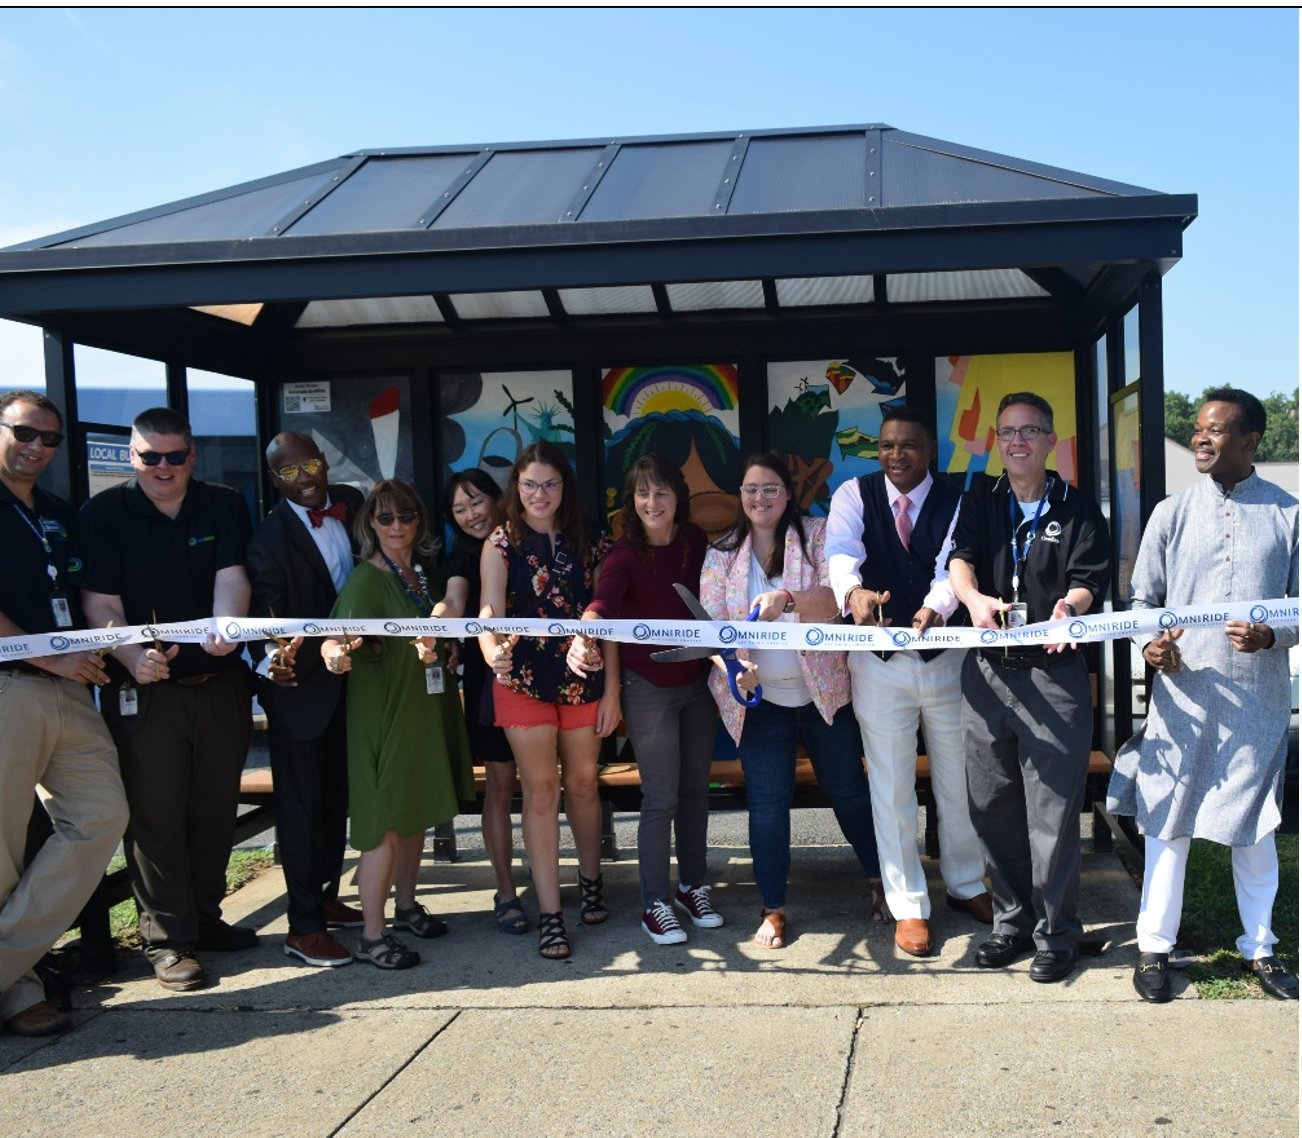 Ribbon cutting on August 24. Shelter on Dale Blvd, near Minnieville Rd, in front of Giant store.